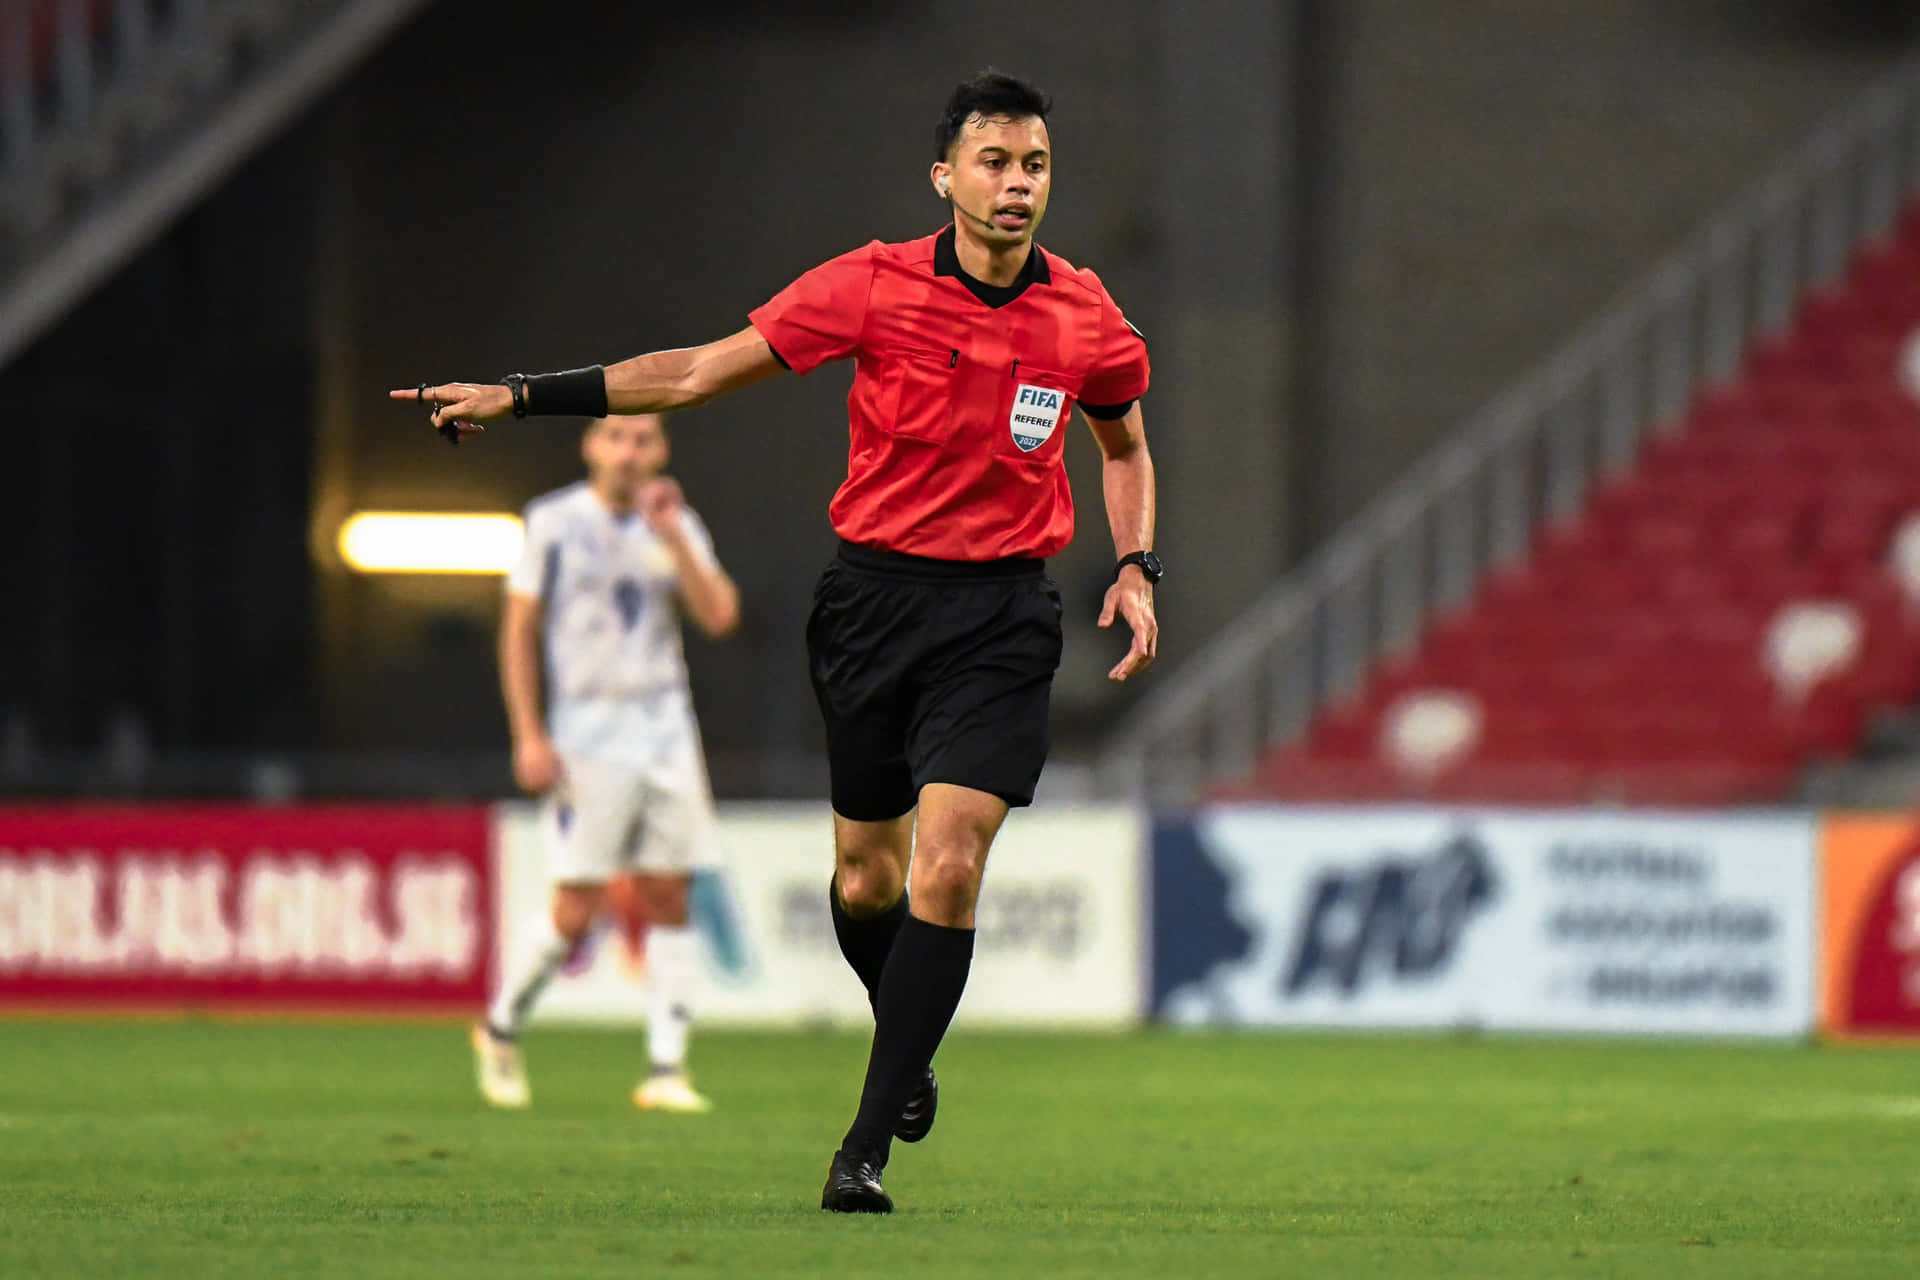 Soccer Referee In Action During Match.jpg Wallpaper